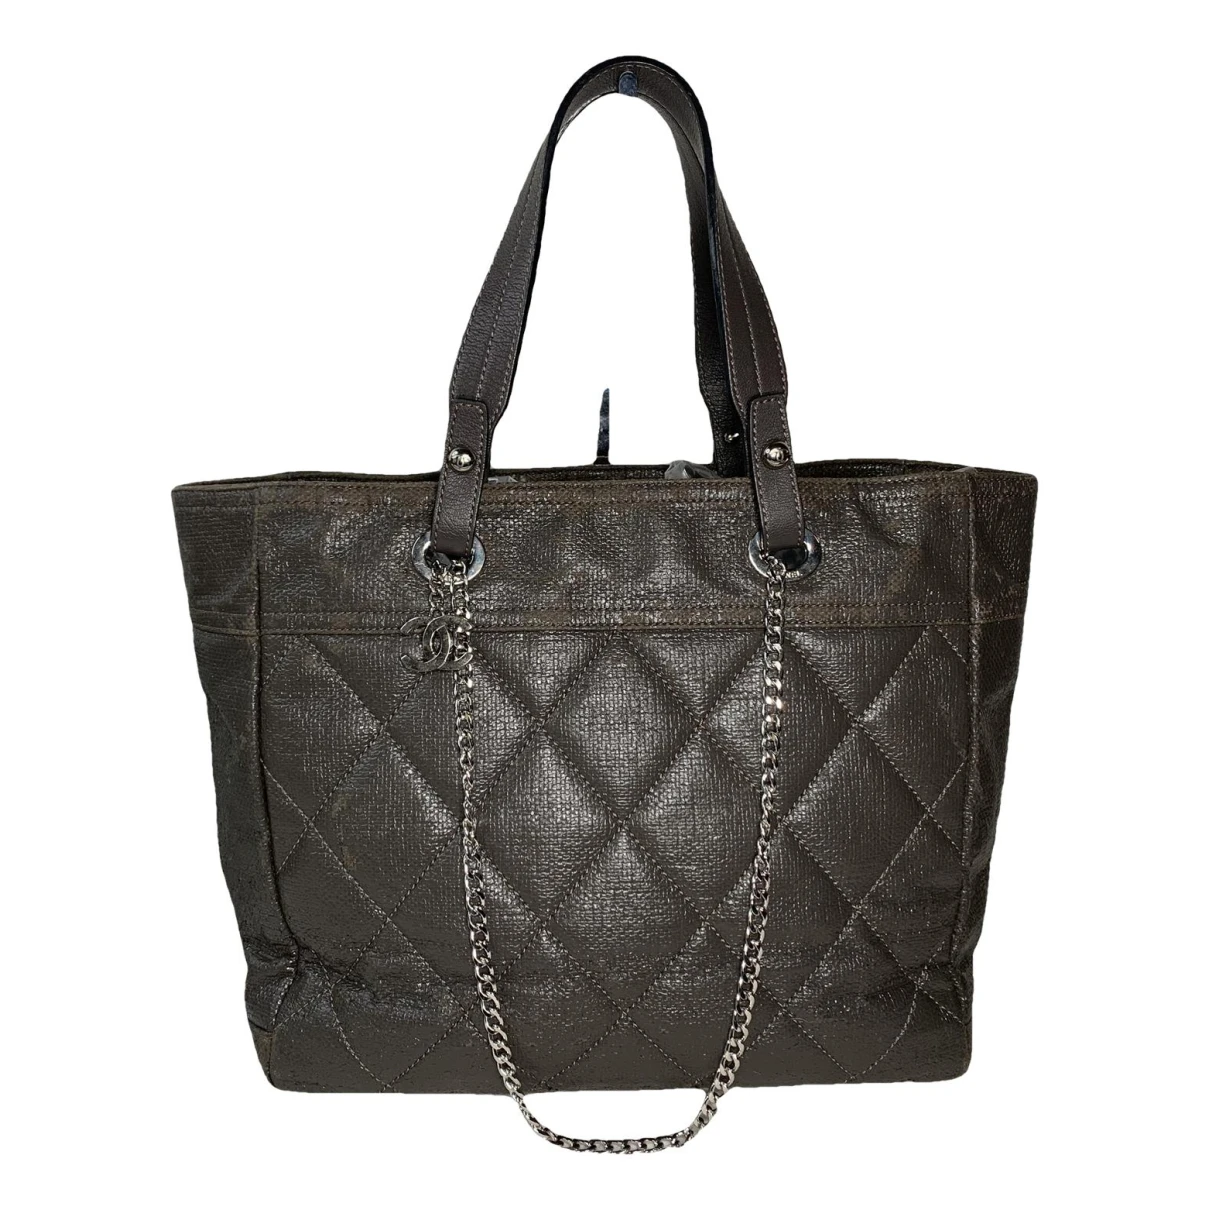 Pre-owned Chanel Paris-biarritz Leather Tote In Black